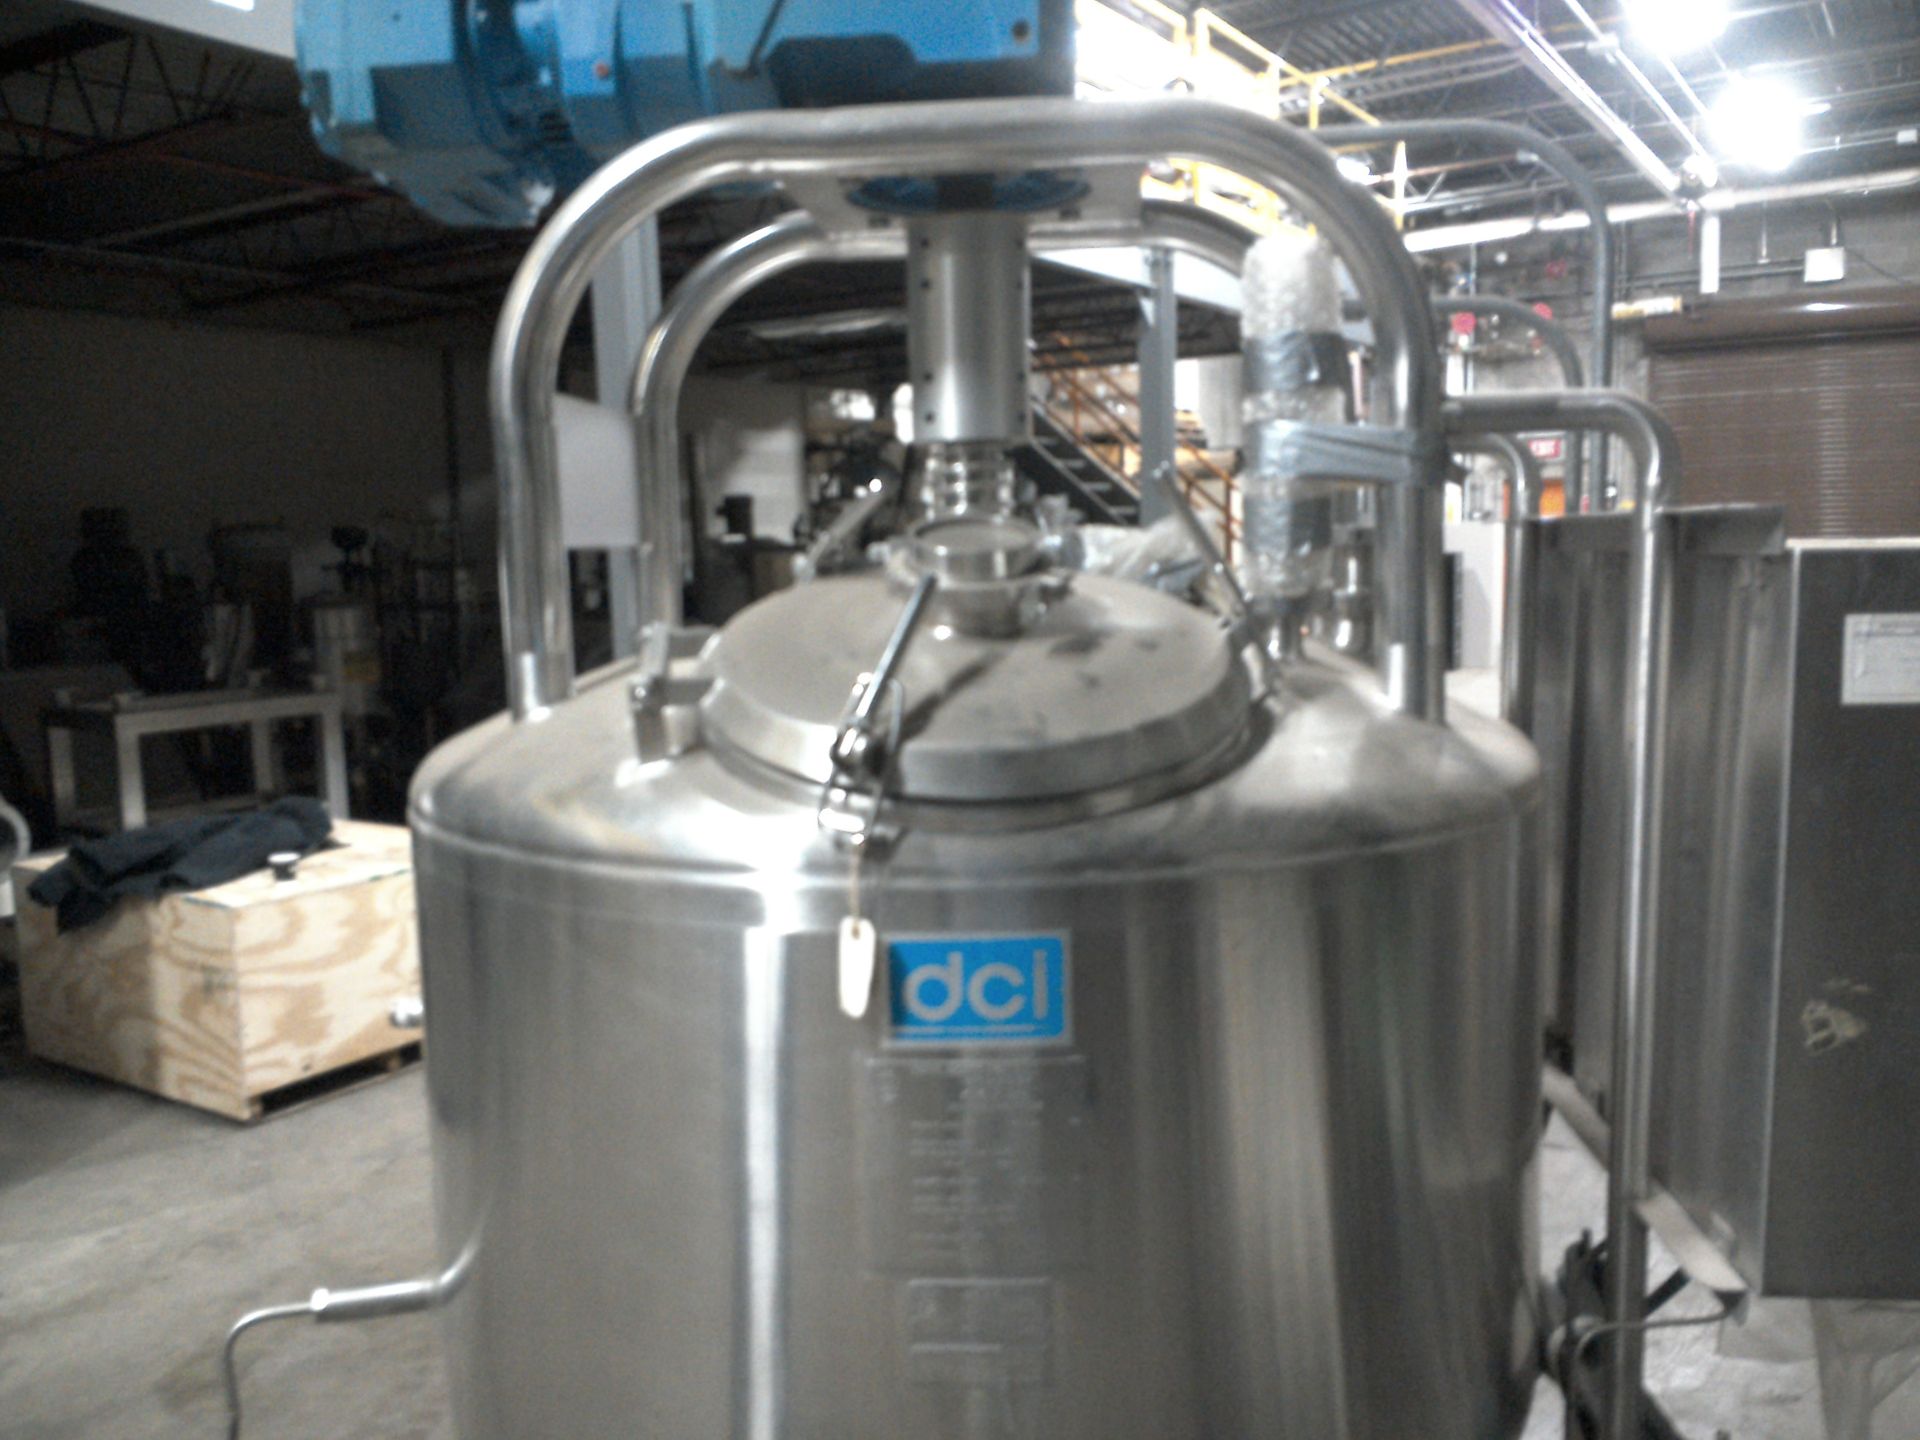 DCI 100 Gallon Dome-Top / Cone-Bottom Procesor, S/N 93-F-46097, Skid Mounted with Chart Recorder and - Image 3 of 11